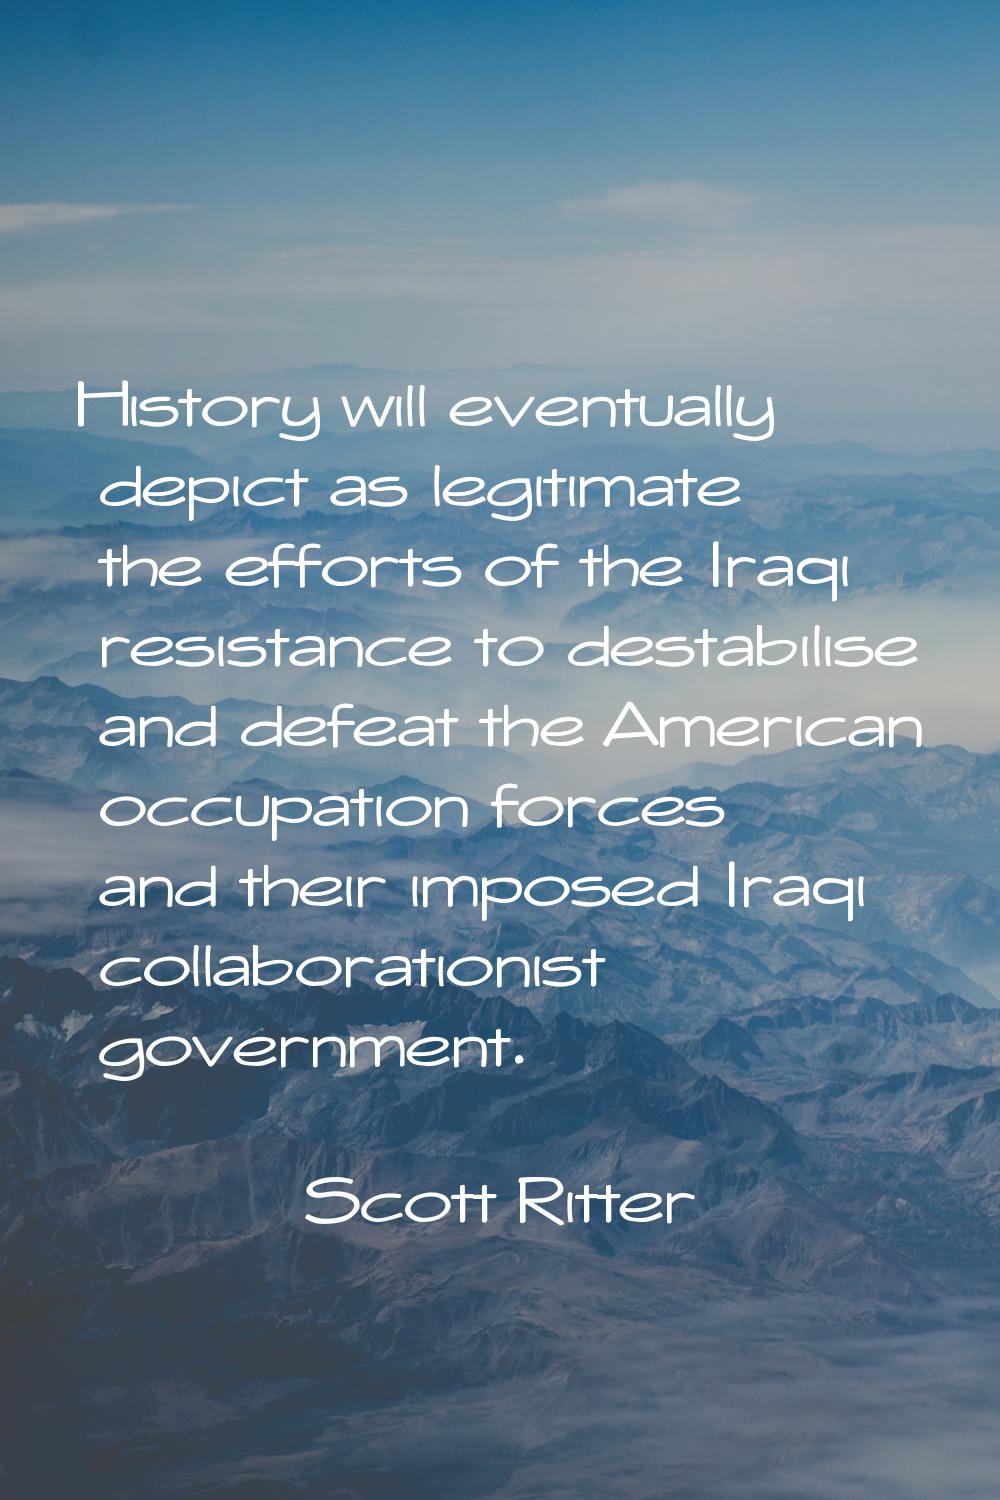 History will eventually depict as legitimate the efforts of the Iraqi resistance to destabilise and